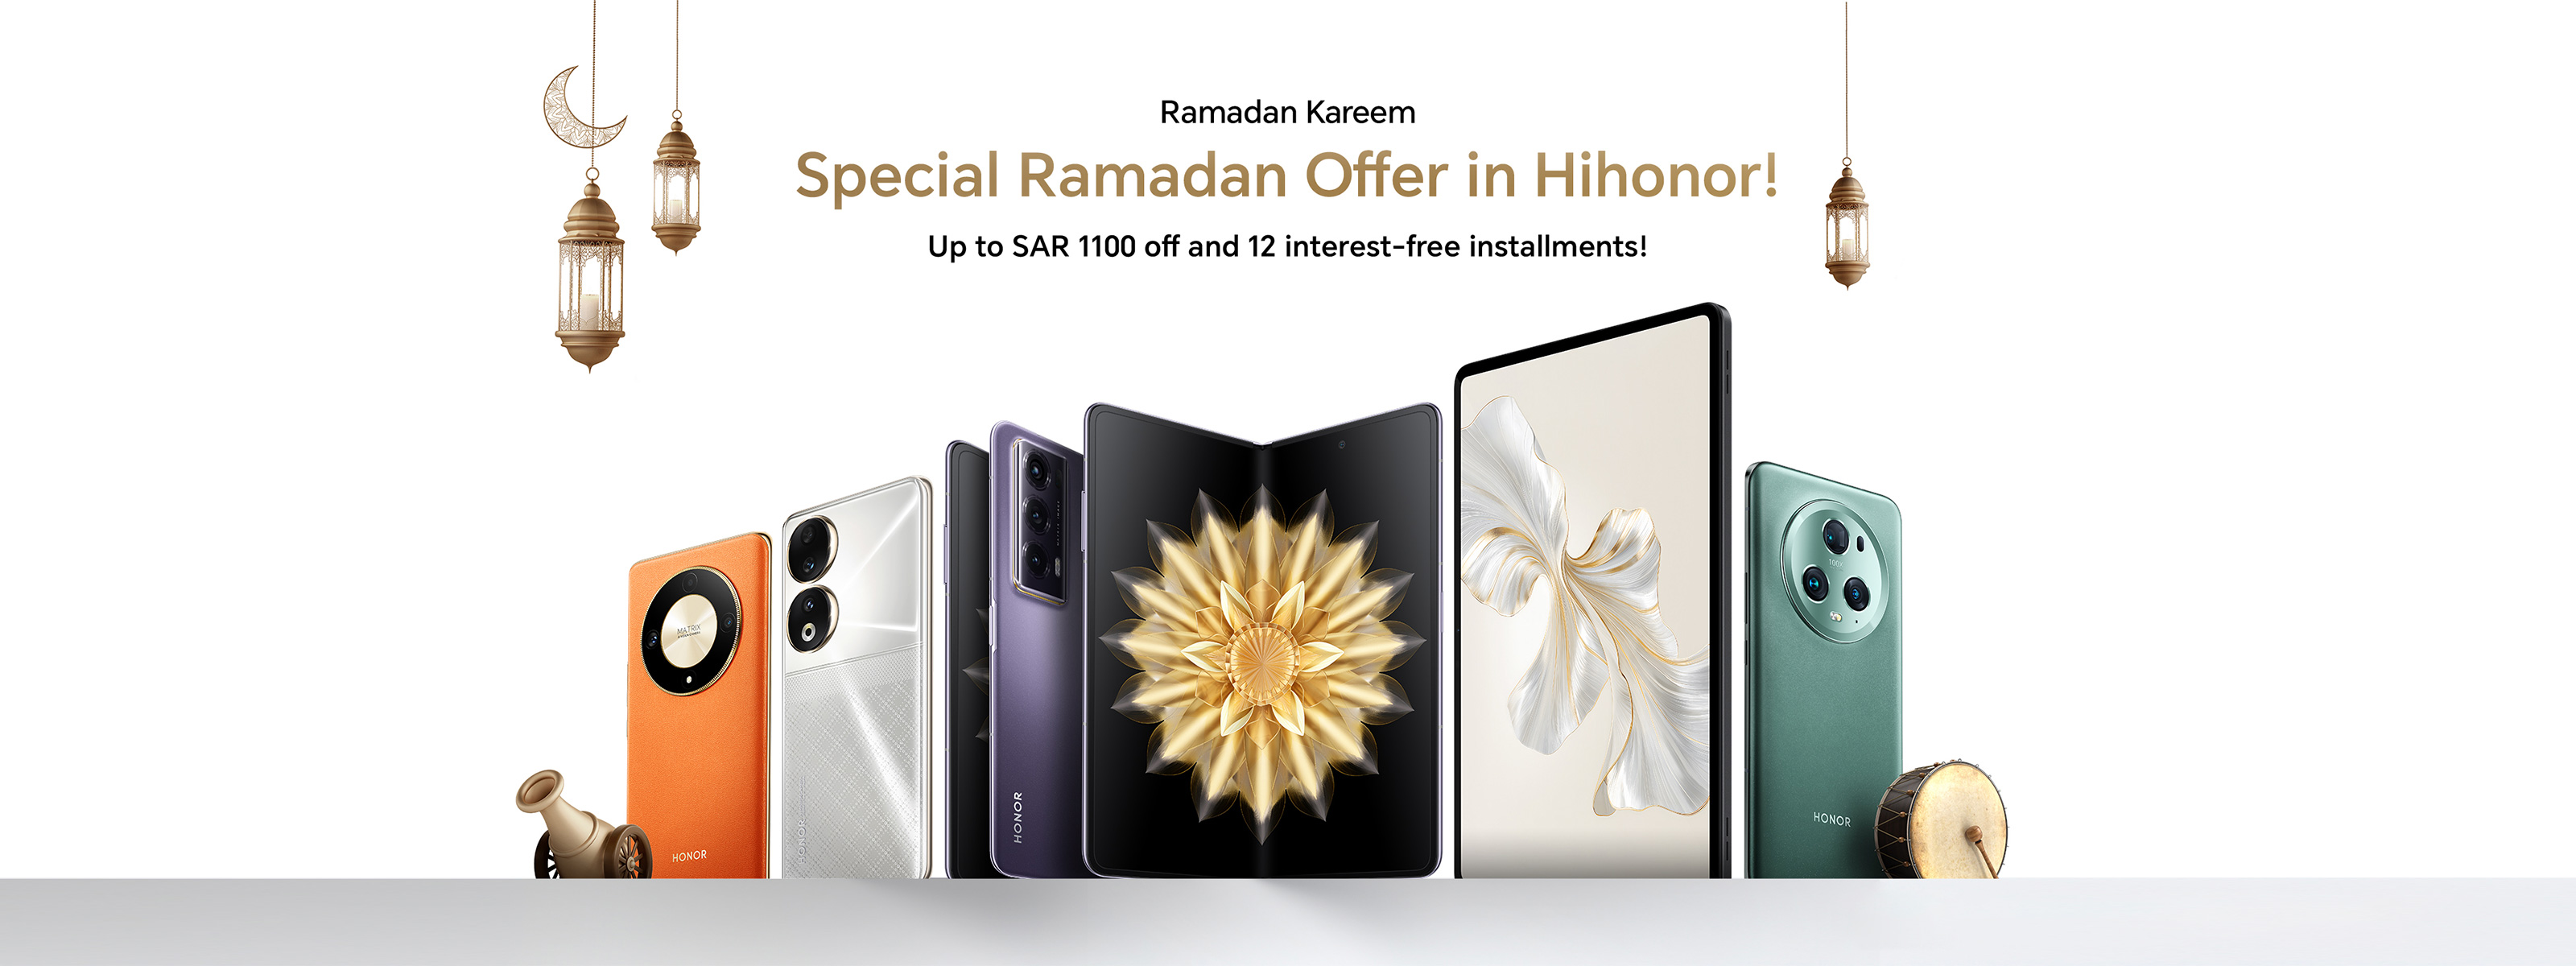 Special Ramadan Offer in Hihonor